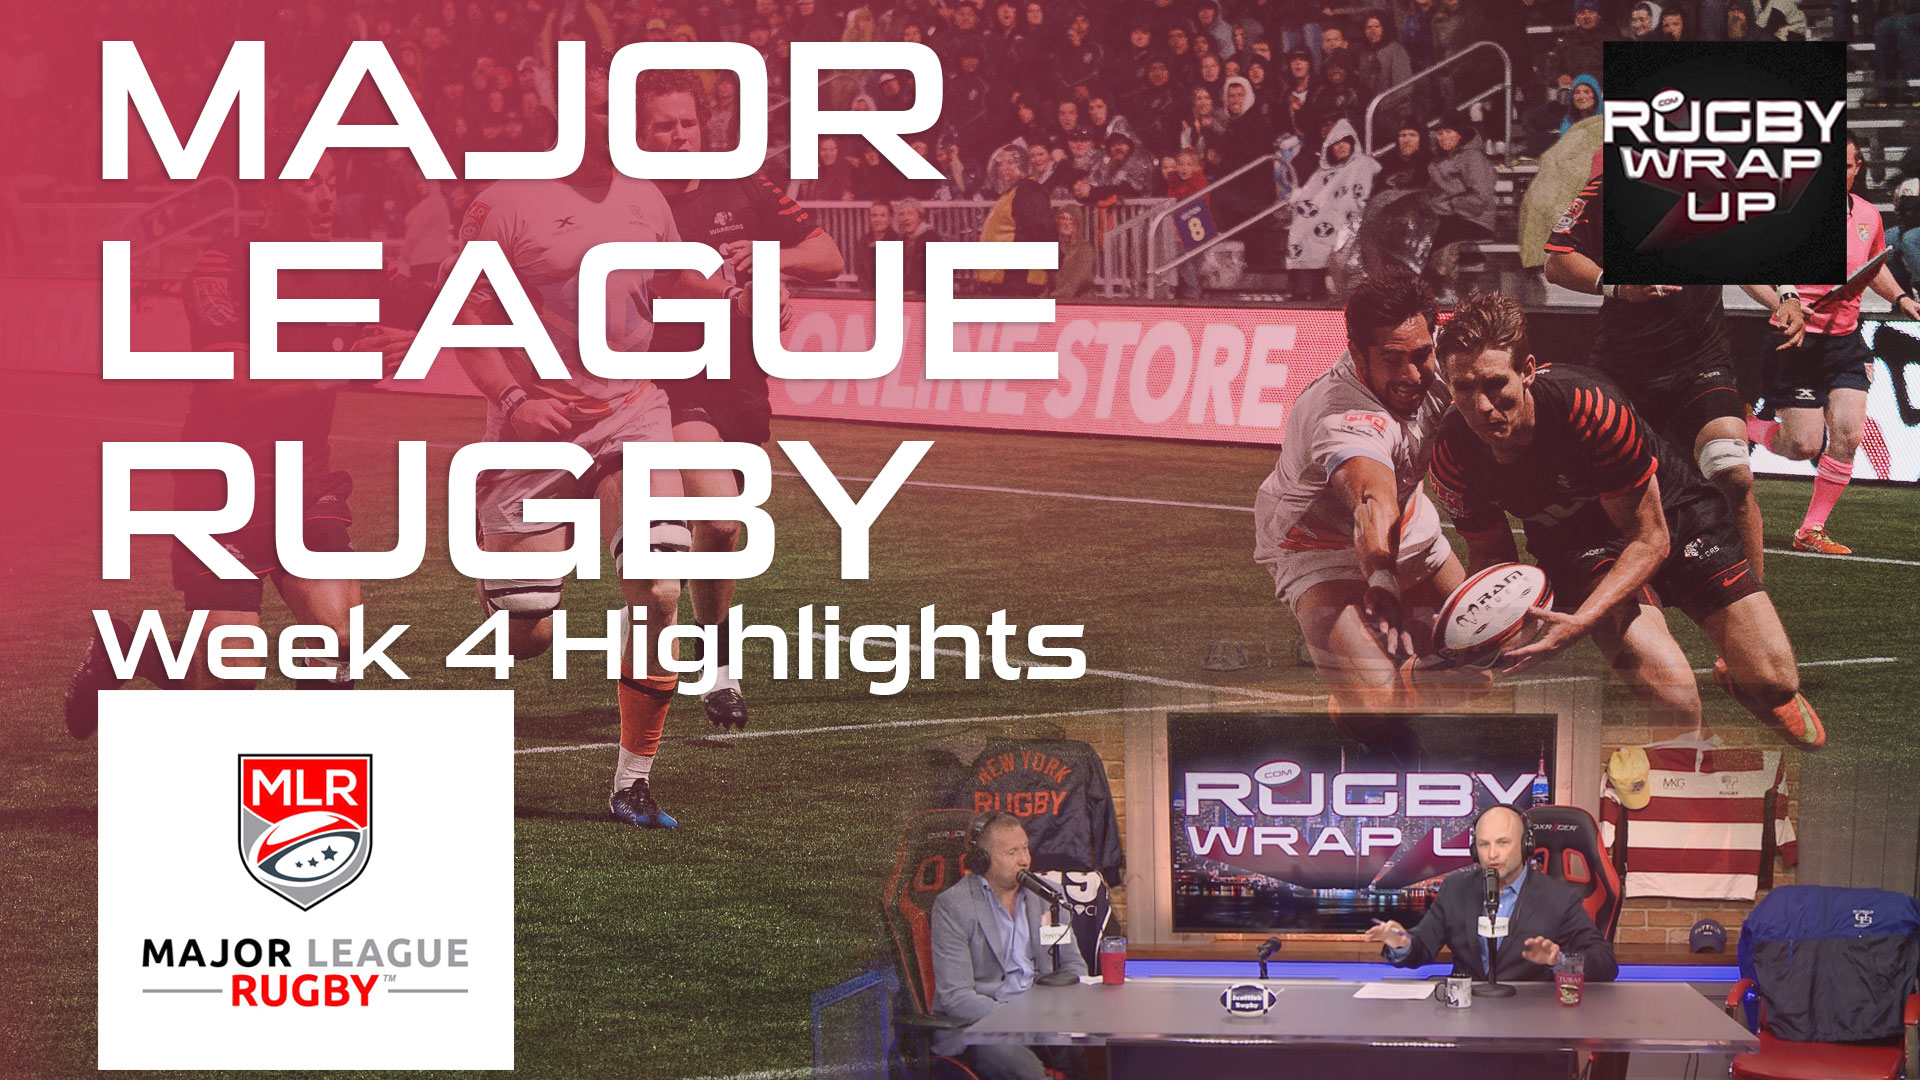 Rugby TV and Podcast: Major League Rugby Recap, Predictions, College Eligibility Issues. Lewis, McCarthy, Nelson, Rugby_Wrap_Up